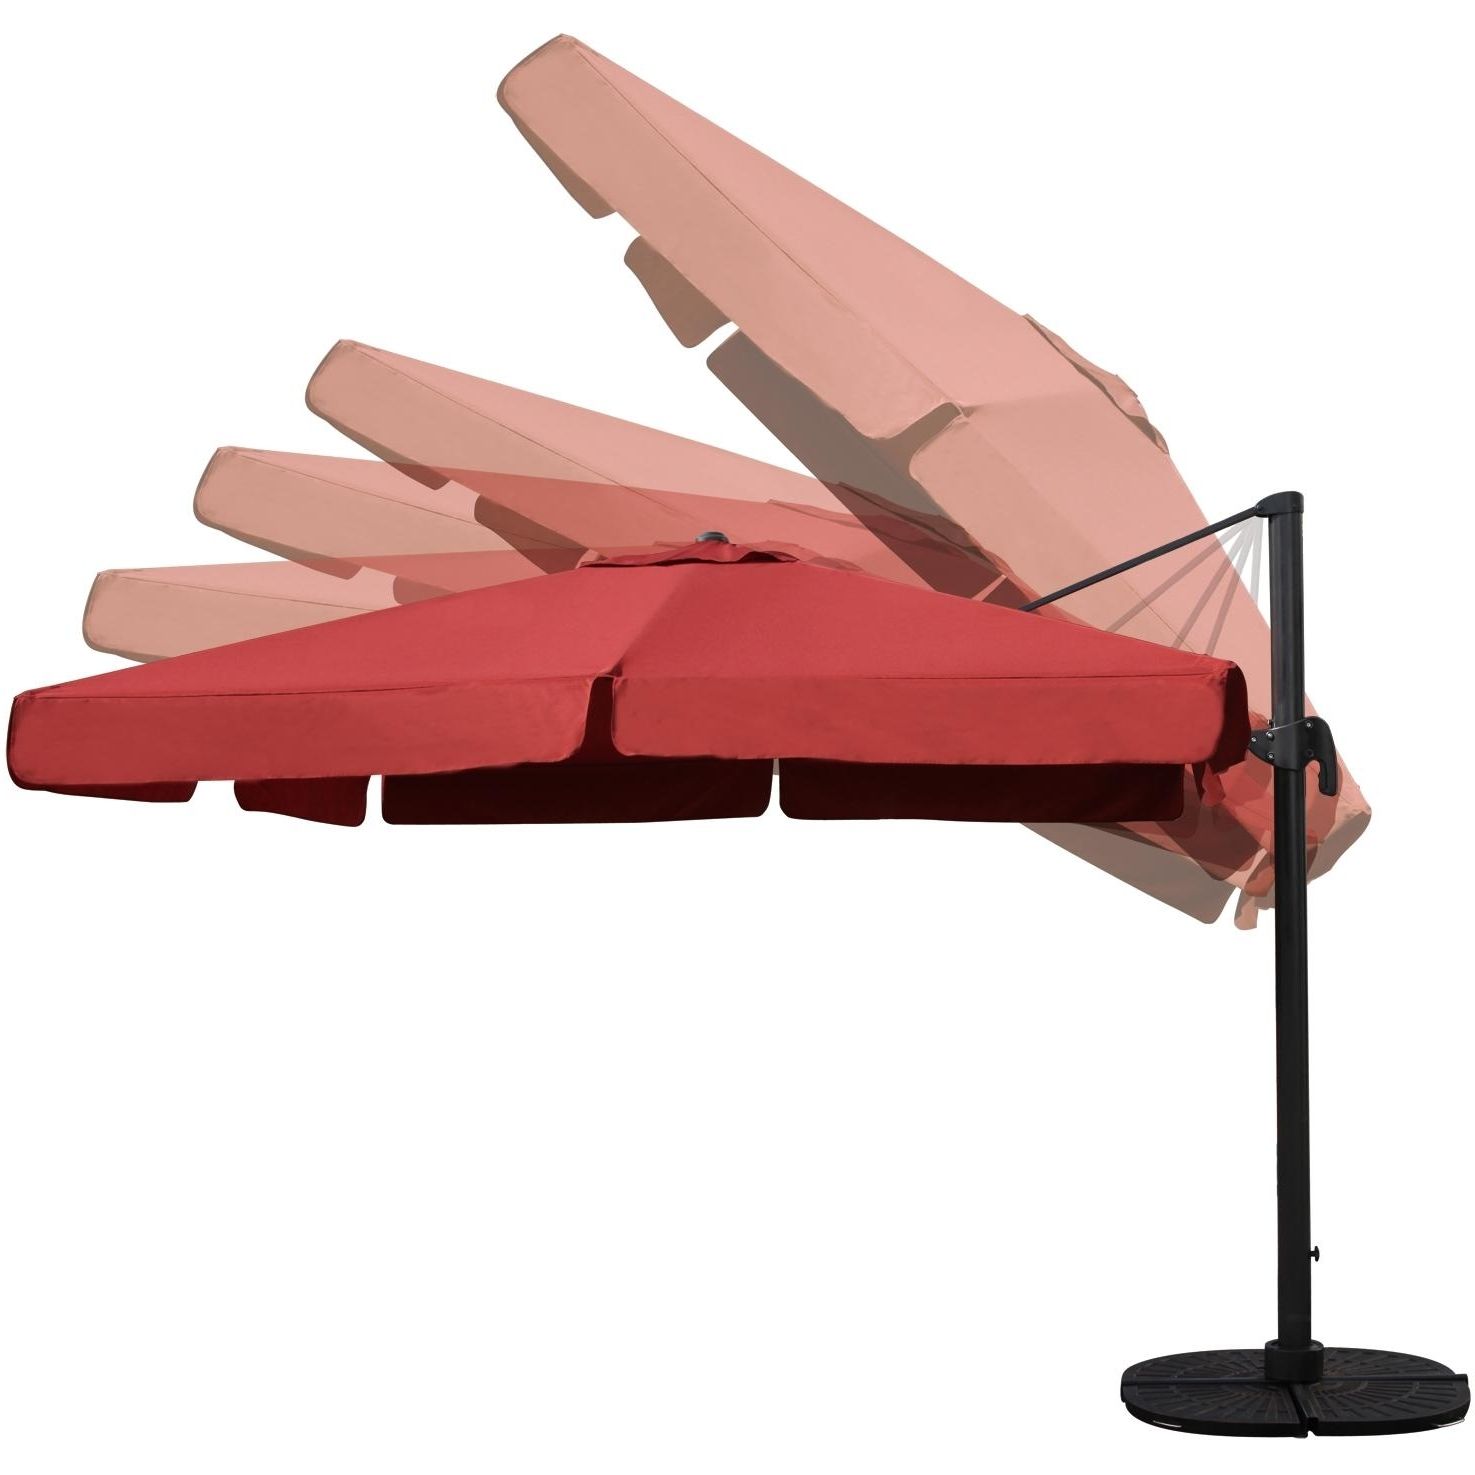 Well Liked Square Cantilever Patio Umbrellas Regarding Darlee 10 Ft Square Cantilever Patio Umbrella With Base – Henna (View 16 of 20)